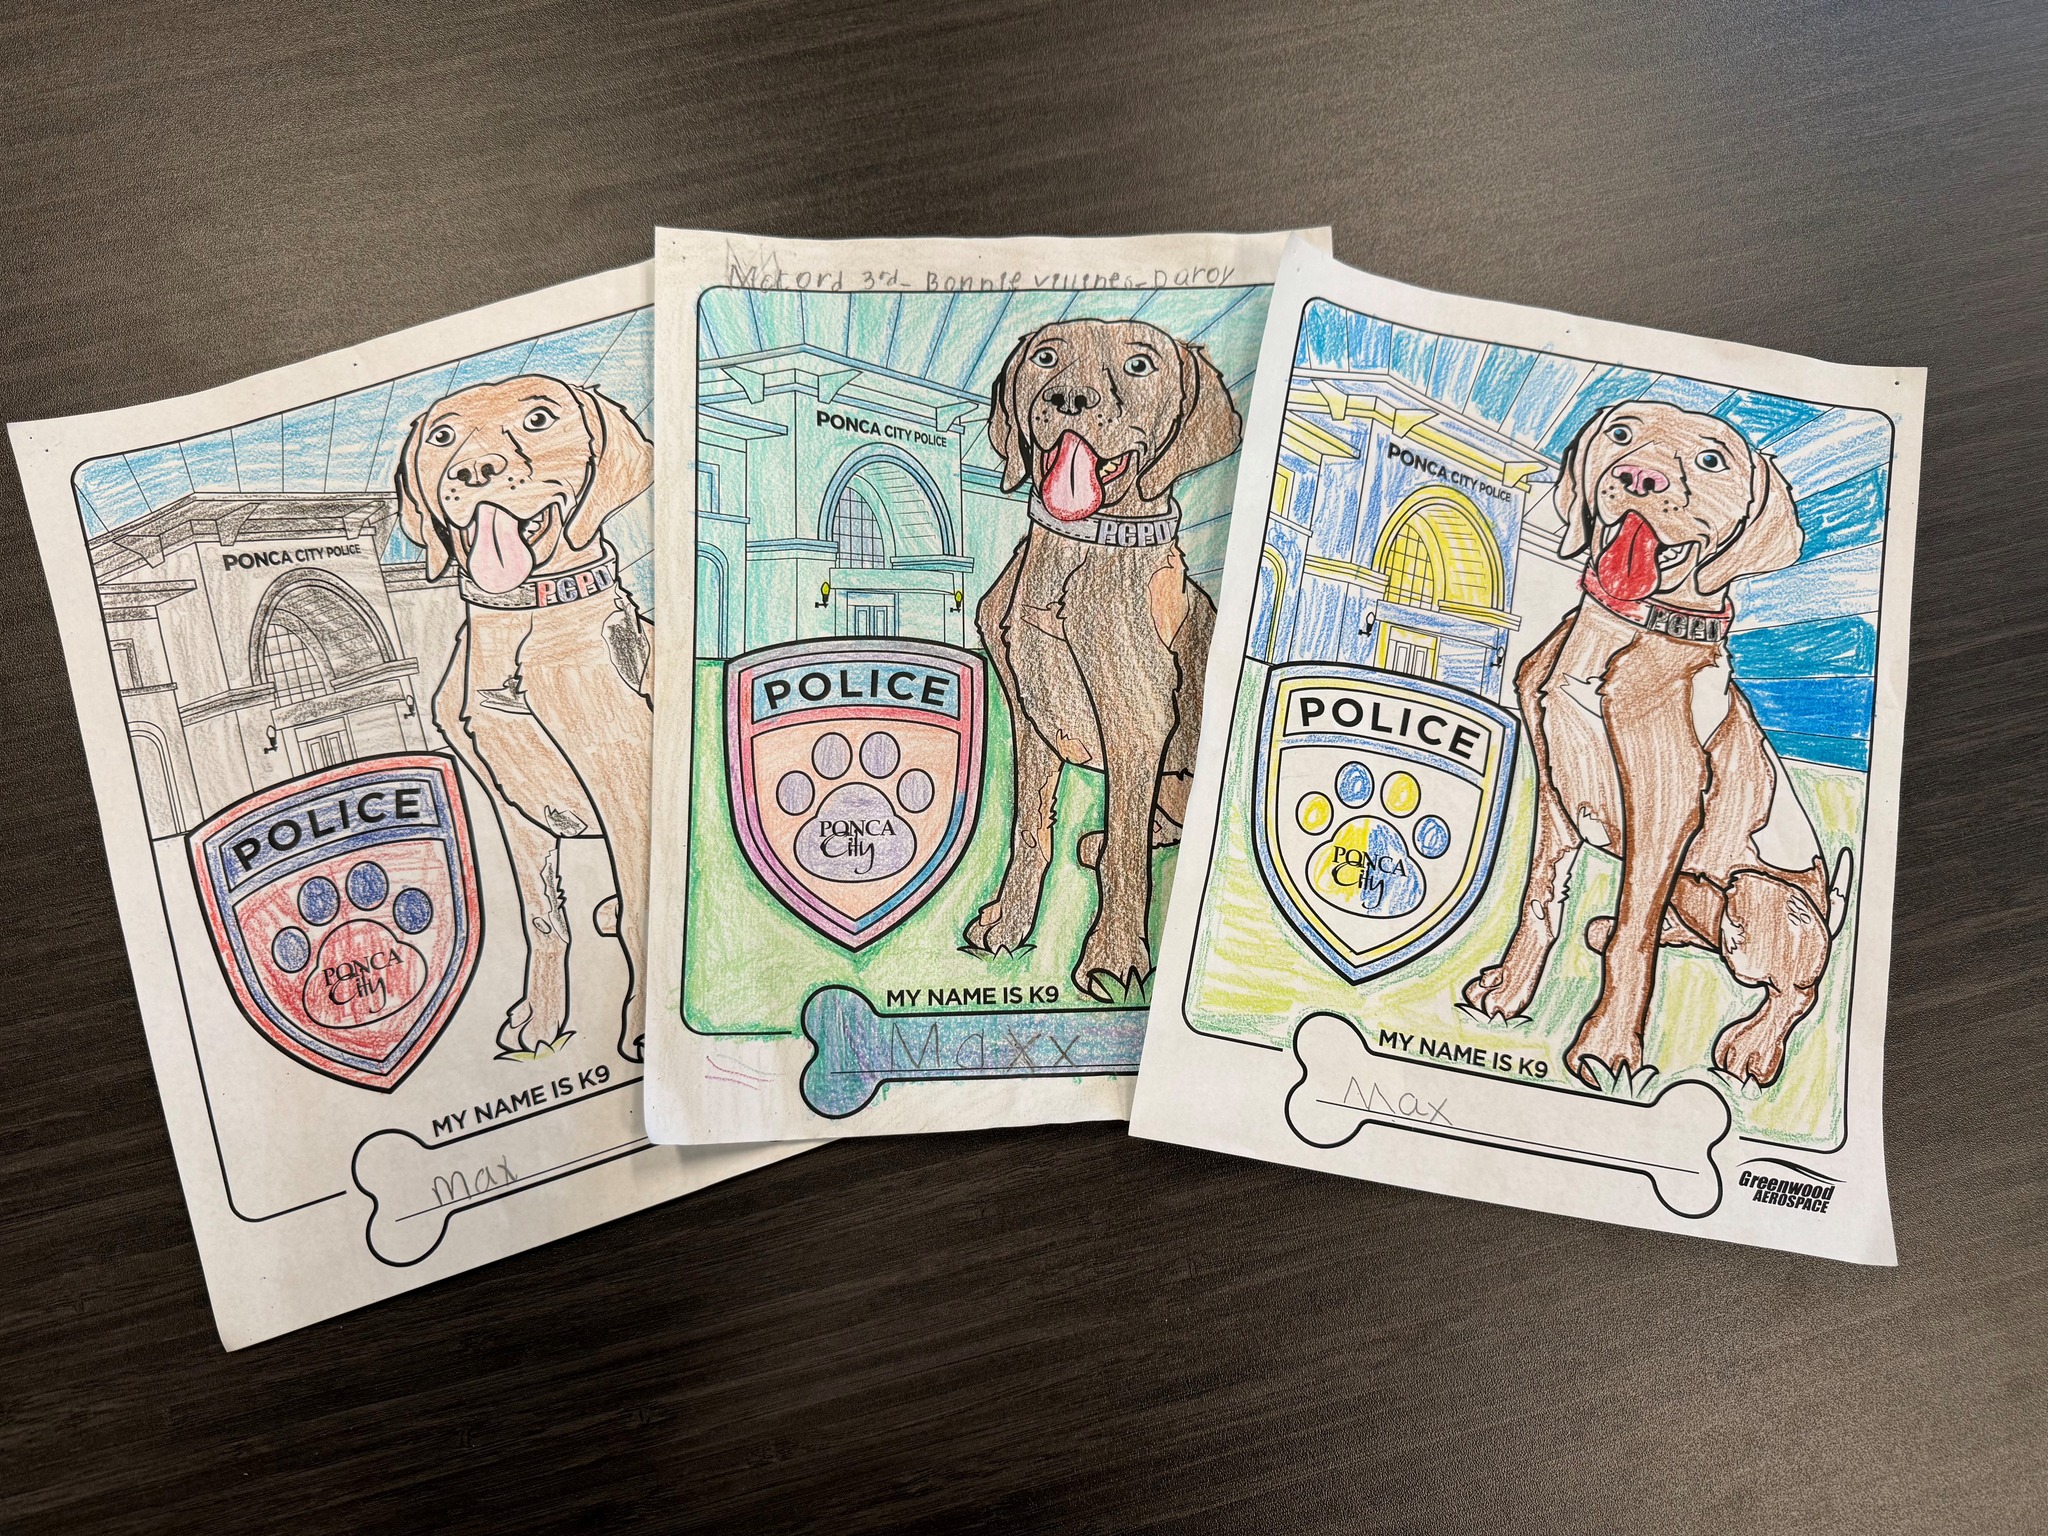 Winners Announced in PCPD Contest to Name Police Dog